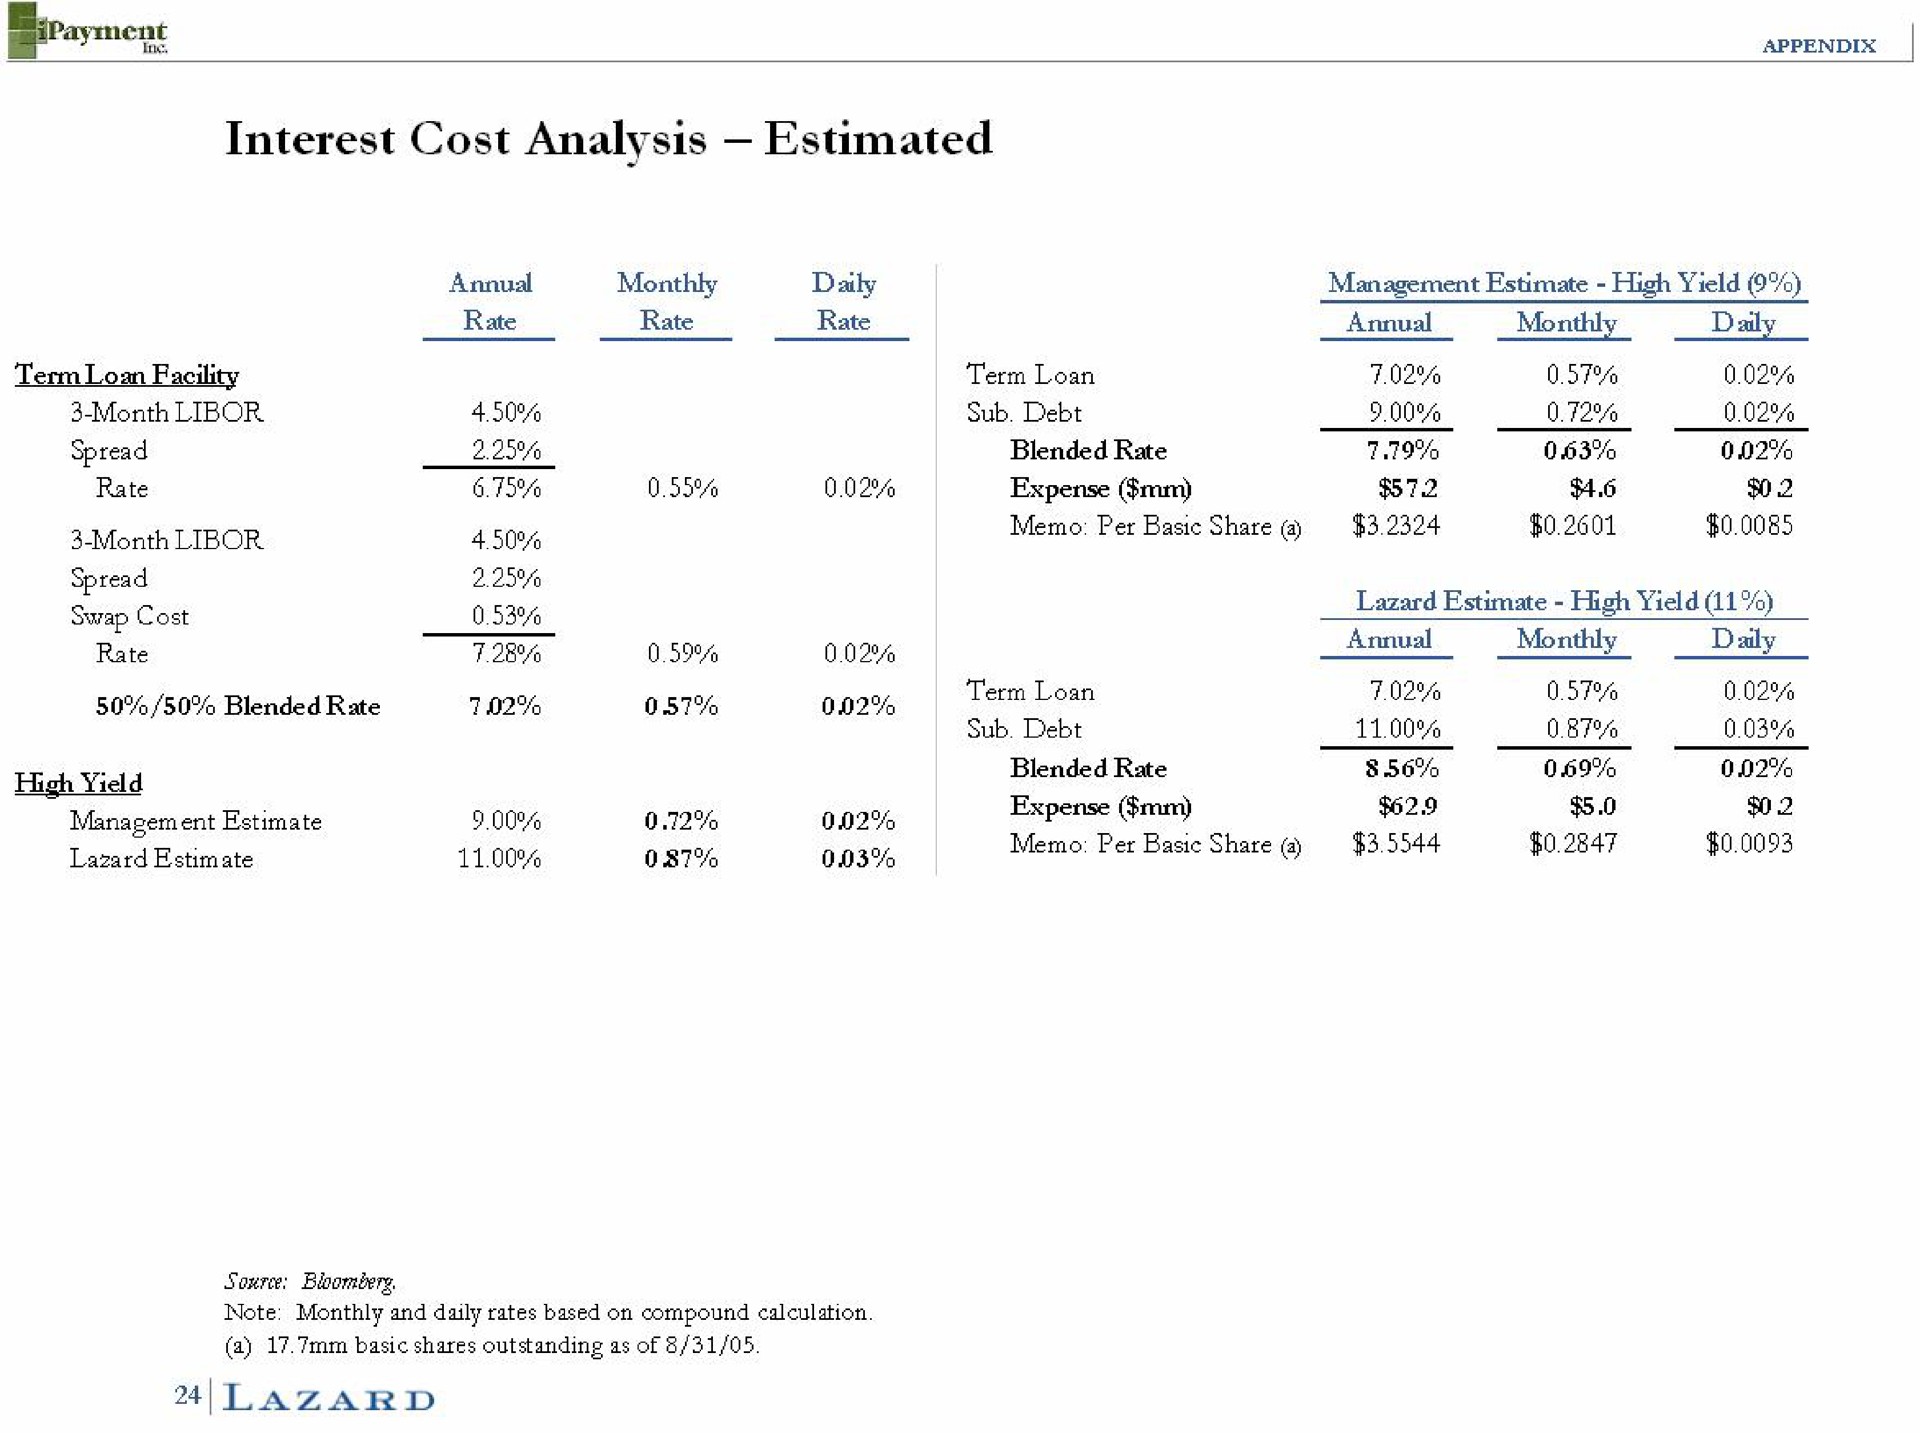 interest cost analysis estimated rate blended rate annual monthly daily term loan lue bee | Lazard